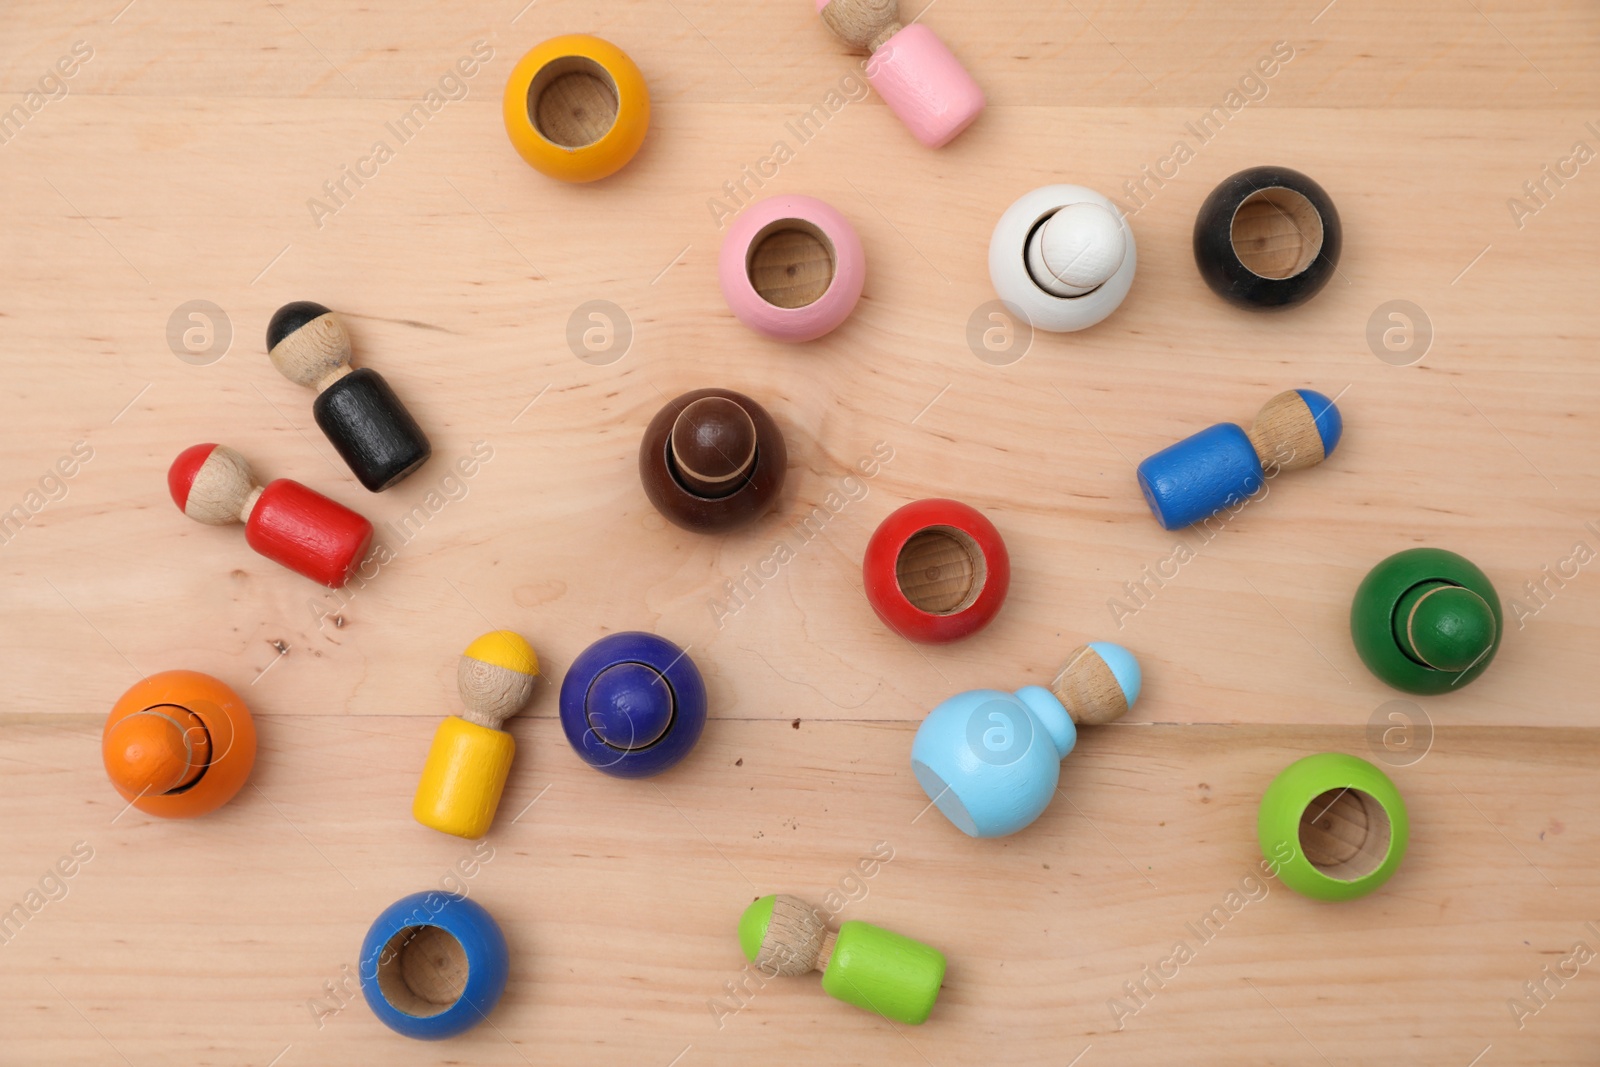 Photo of Wooden colorful dolls shaped building blocks on table, flat lay. Montessori toy